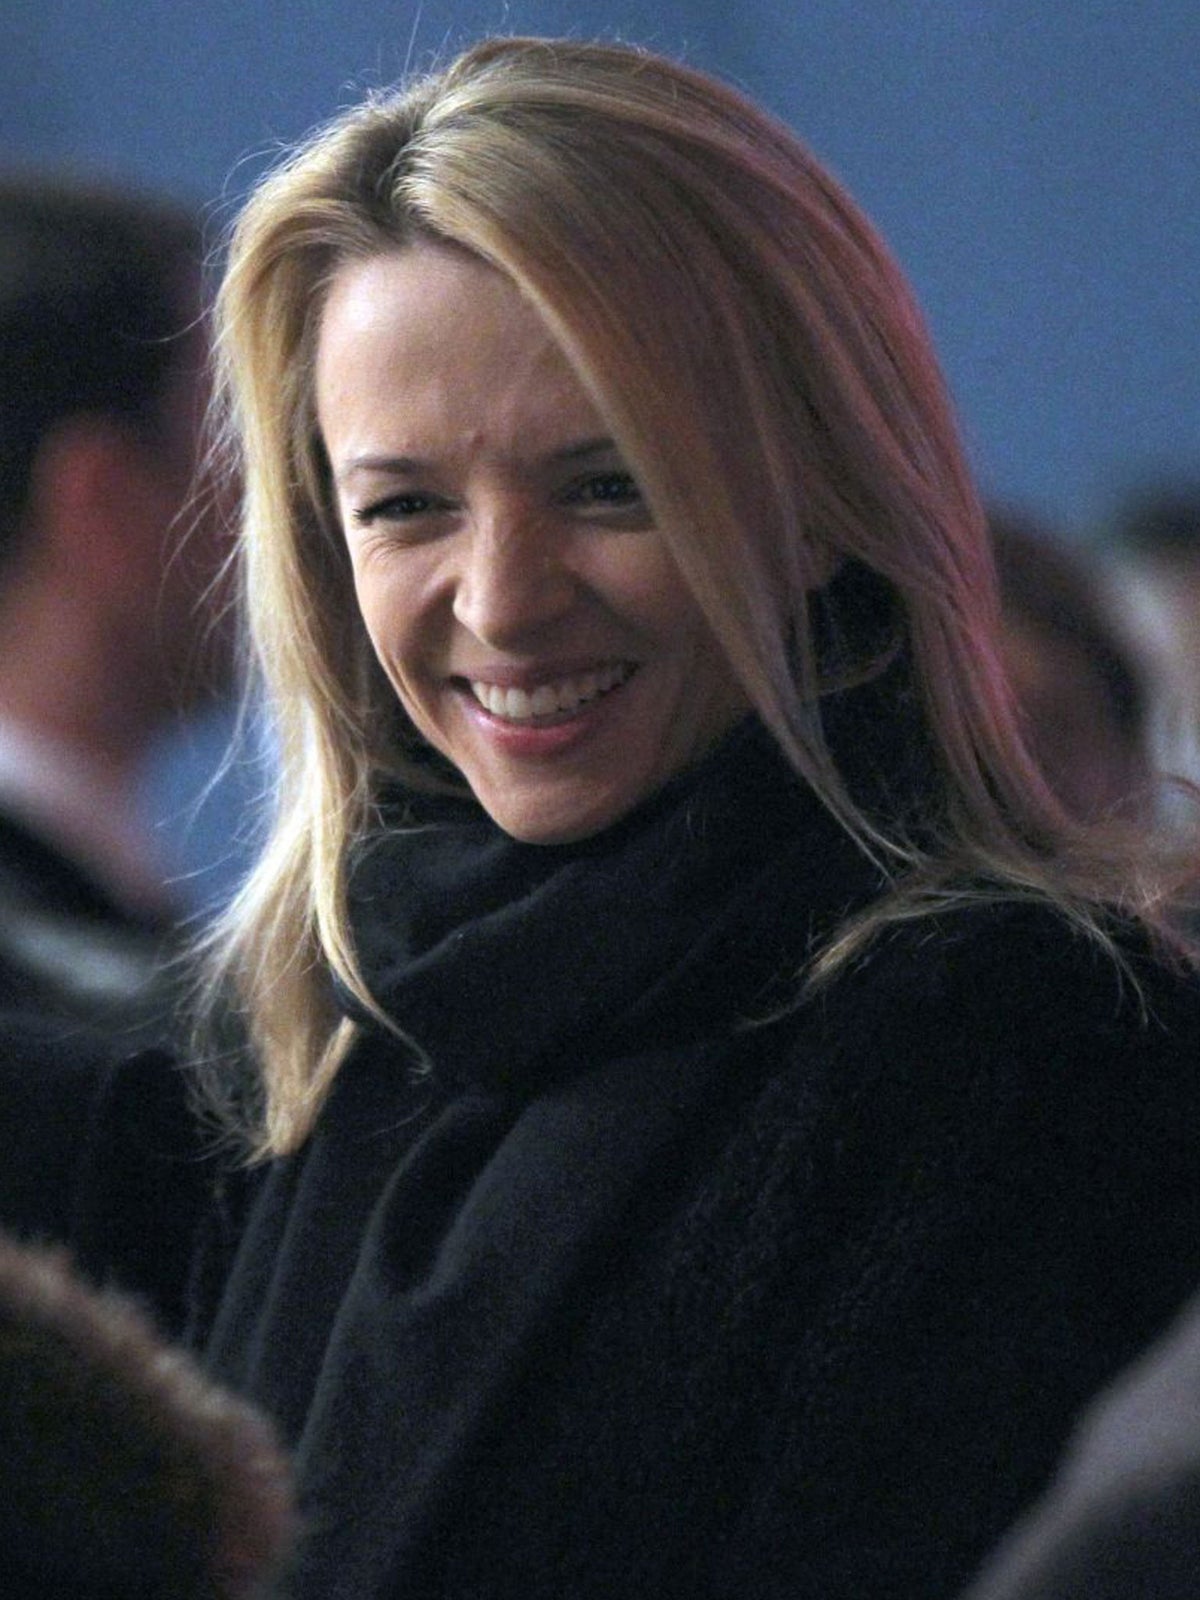 A life of luxury: Delphine Arnault is made to measure for the